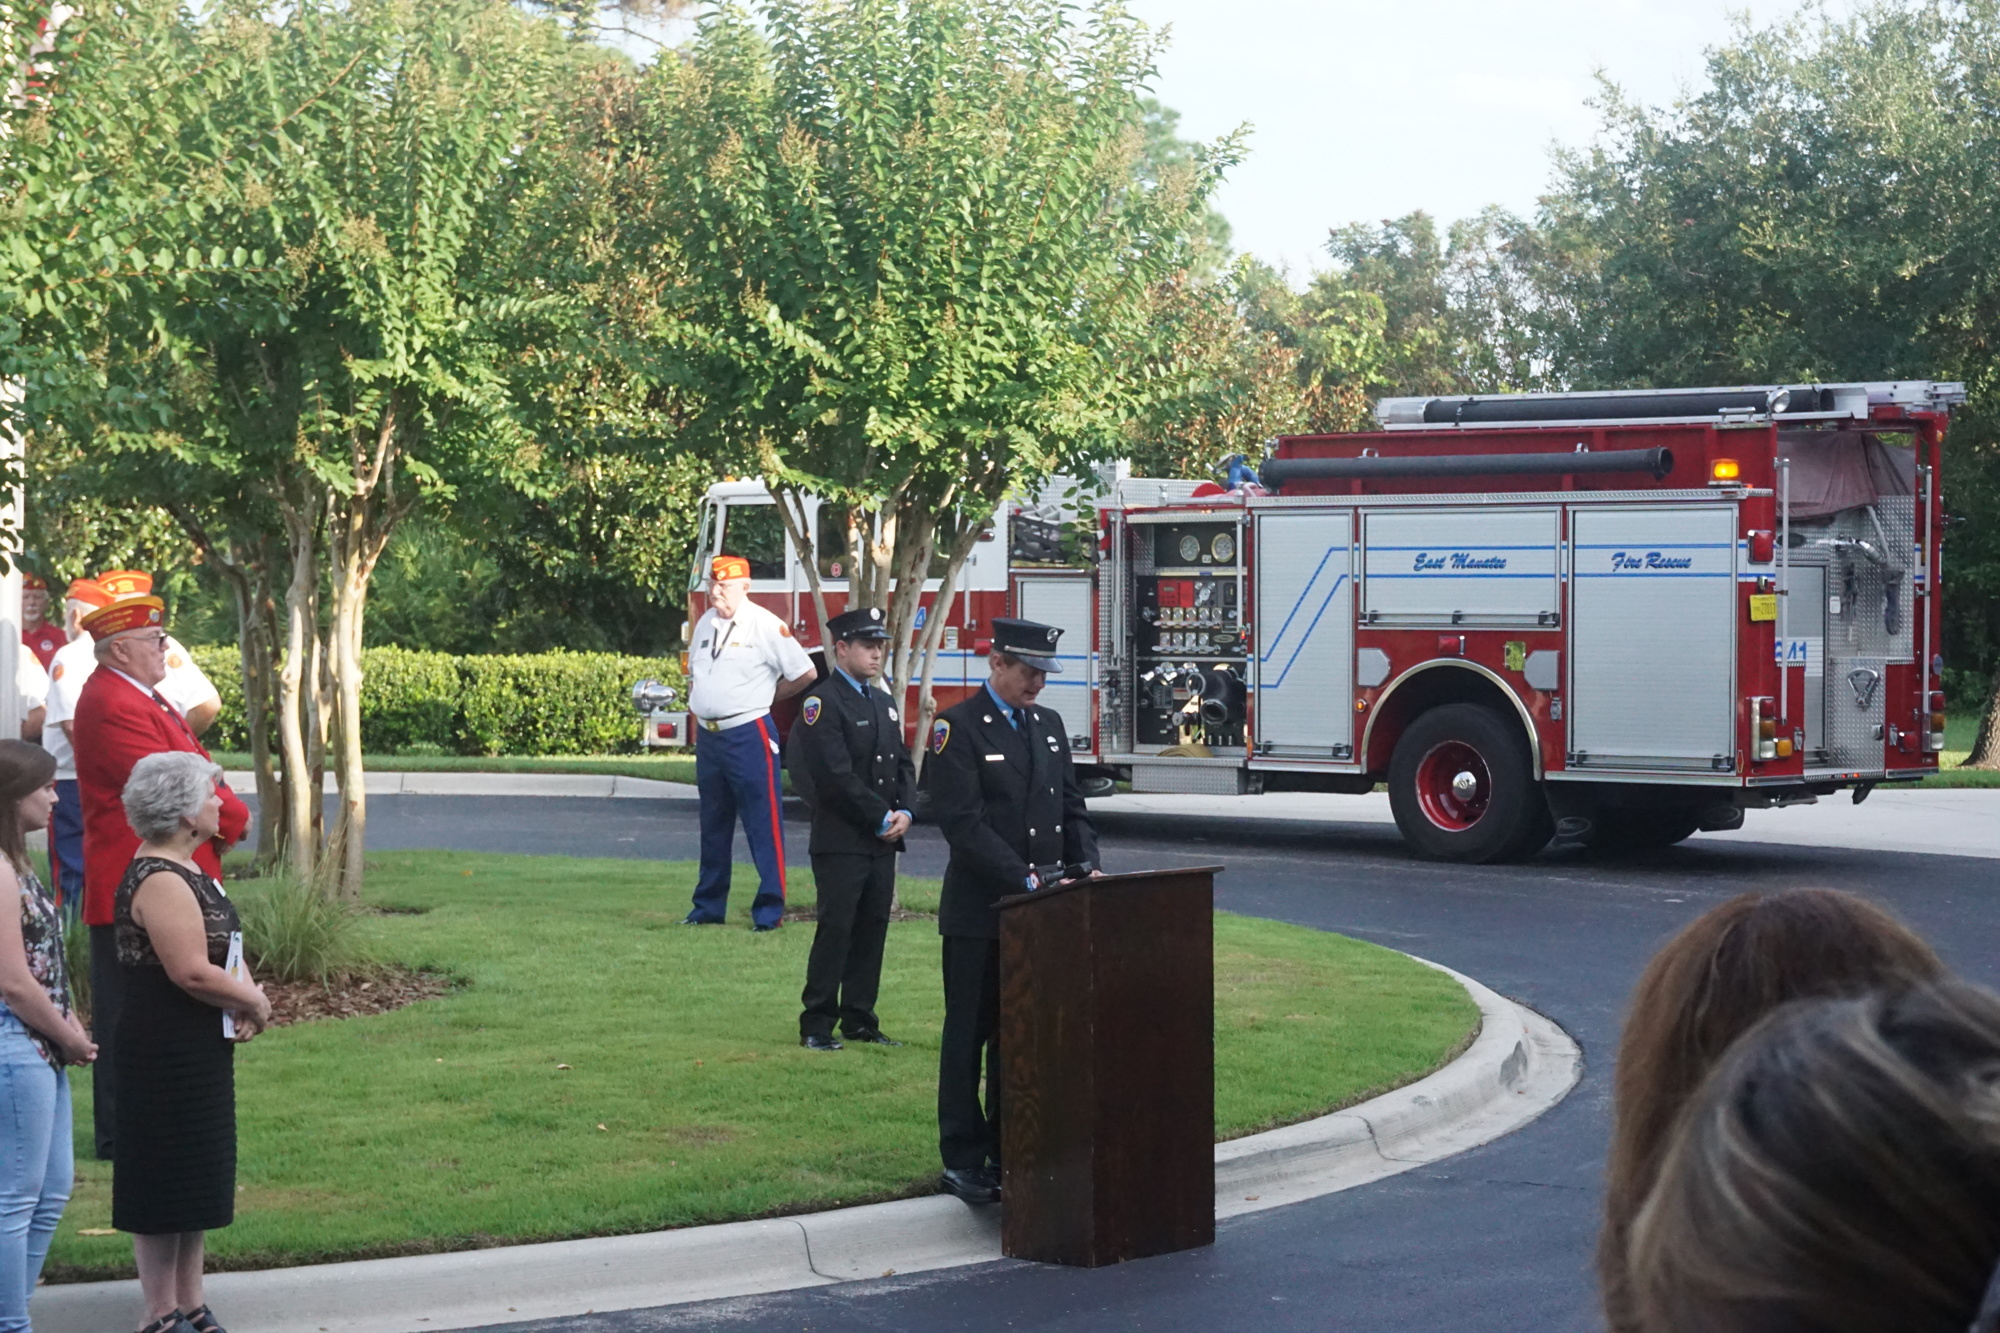 Local engineer Jefferson Bagley speaks for an audience at the East County State College of Florida Sept. 11 ceremony.